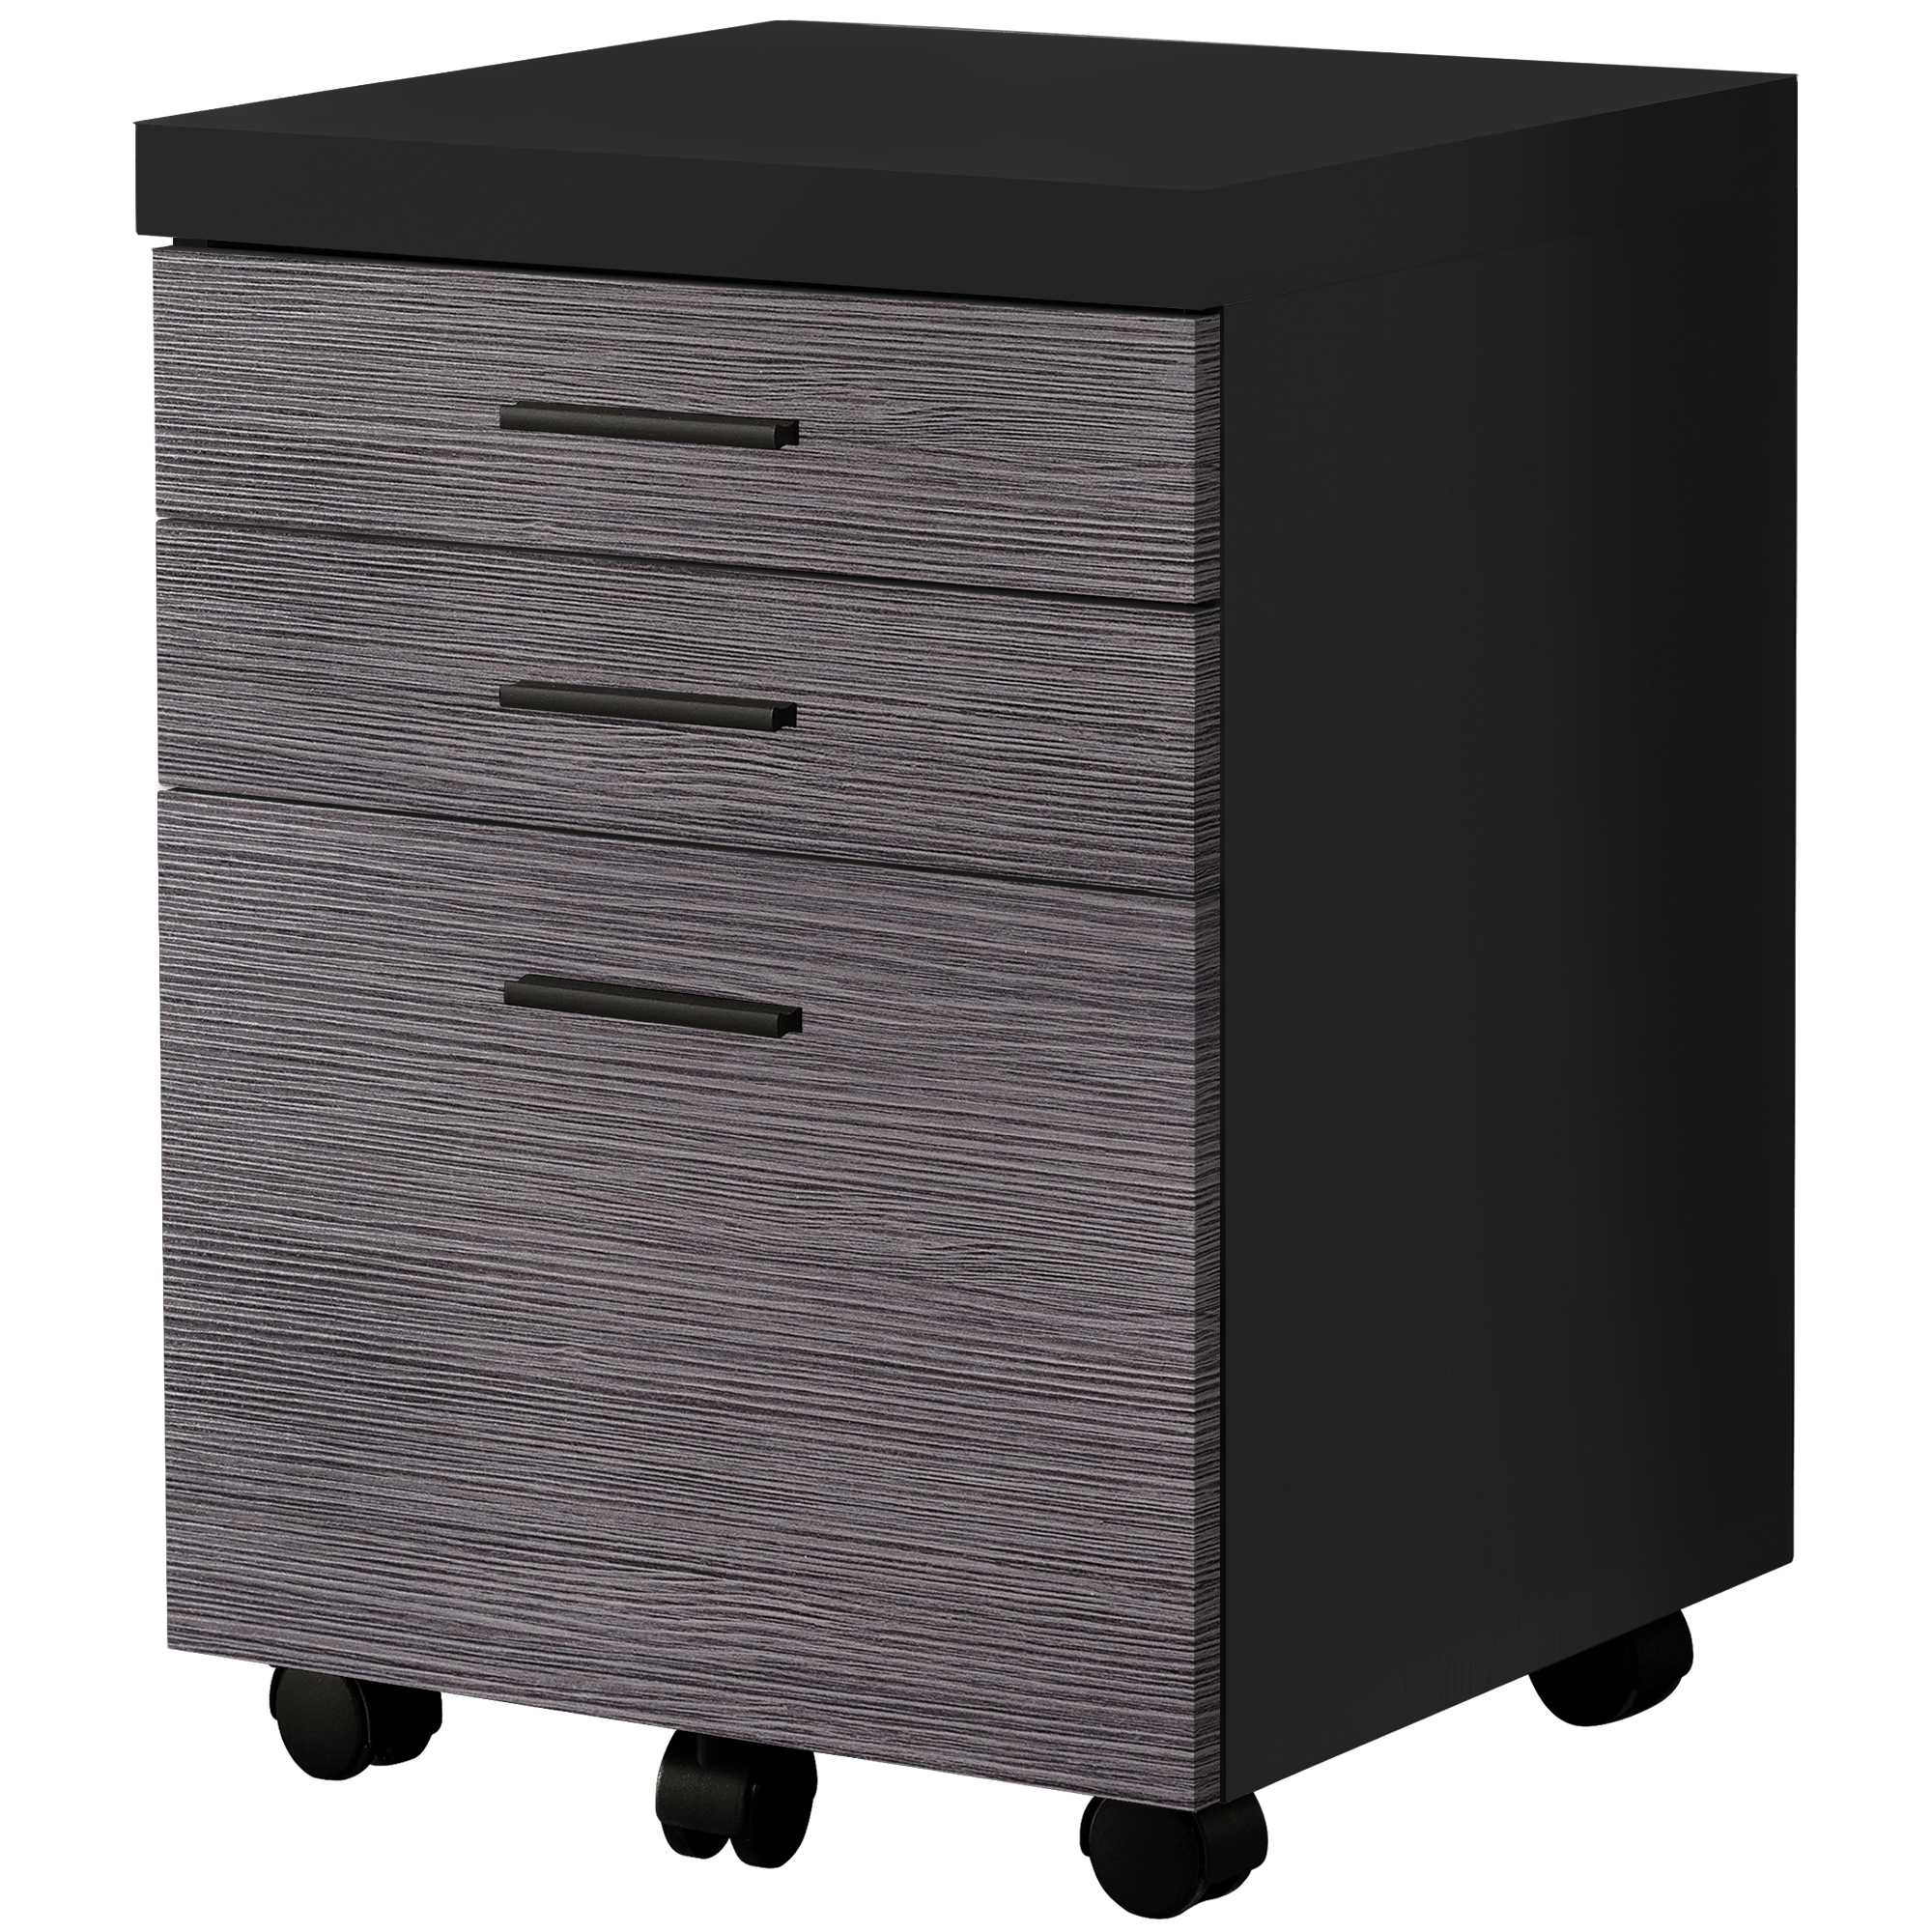 17.75" x 18.25" x 25.25" Black, Grey, Particle Board, 3 Drawers - Filing Cabinet